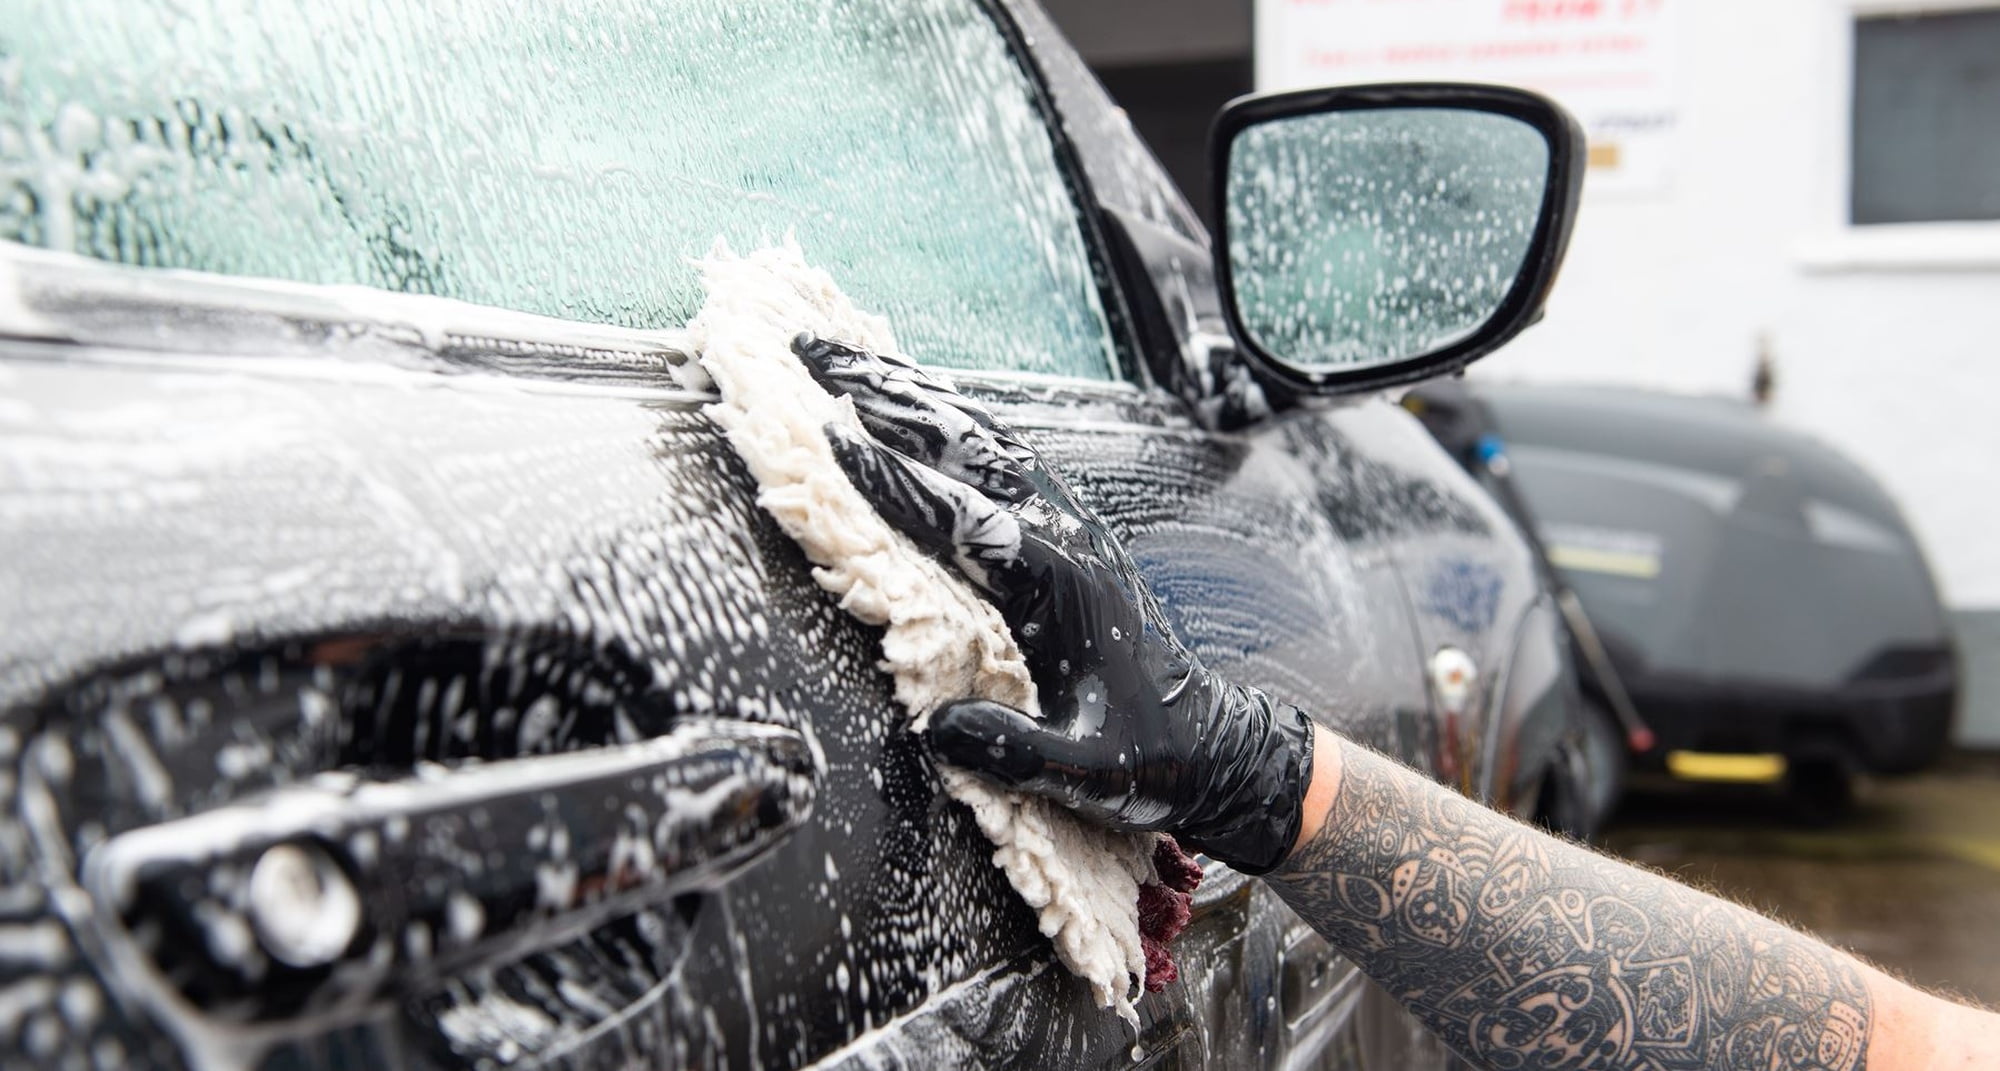 Car being washed by hand and soap